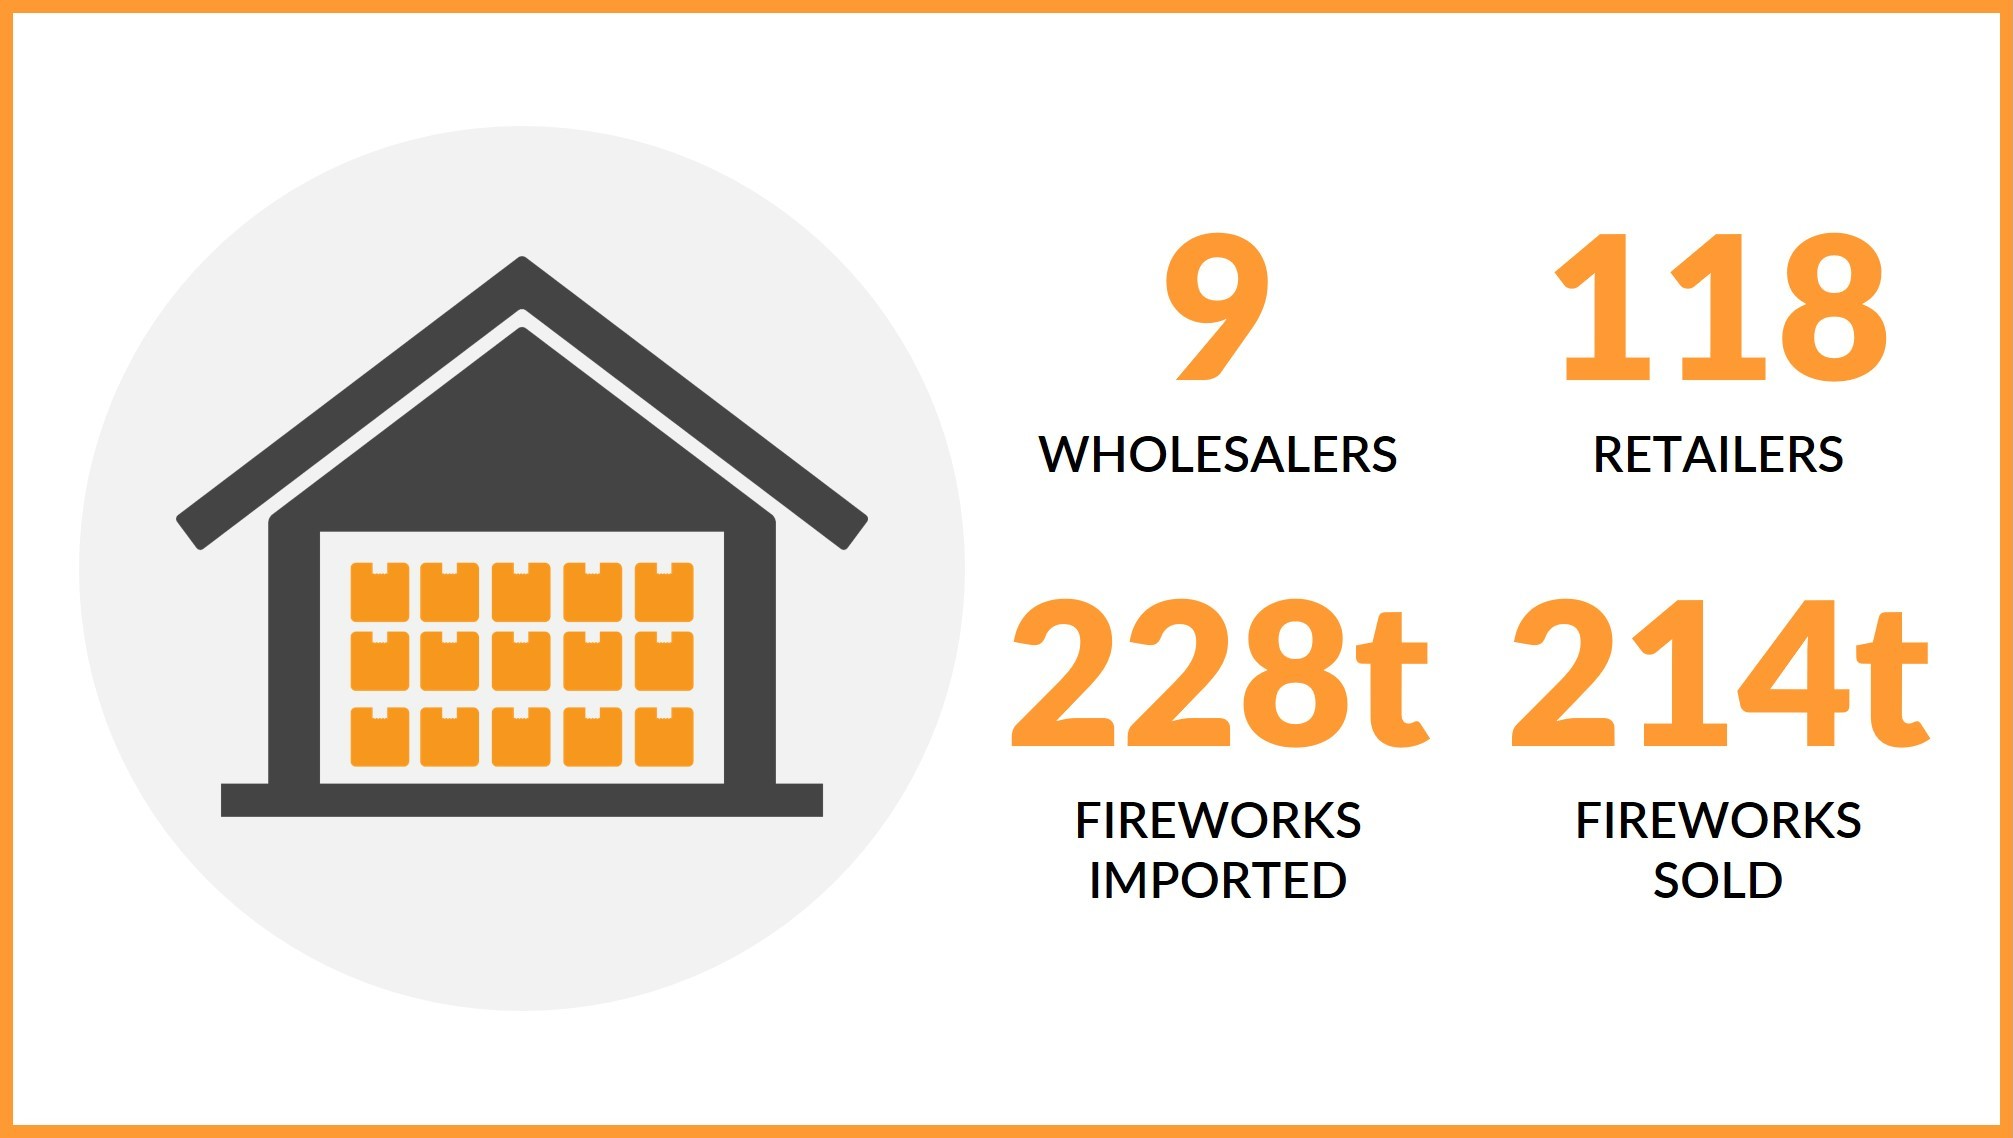 The image shows the number of fireworks wholesalers and retailers, including the amount of fireworks imported and sold on Territory Day.